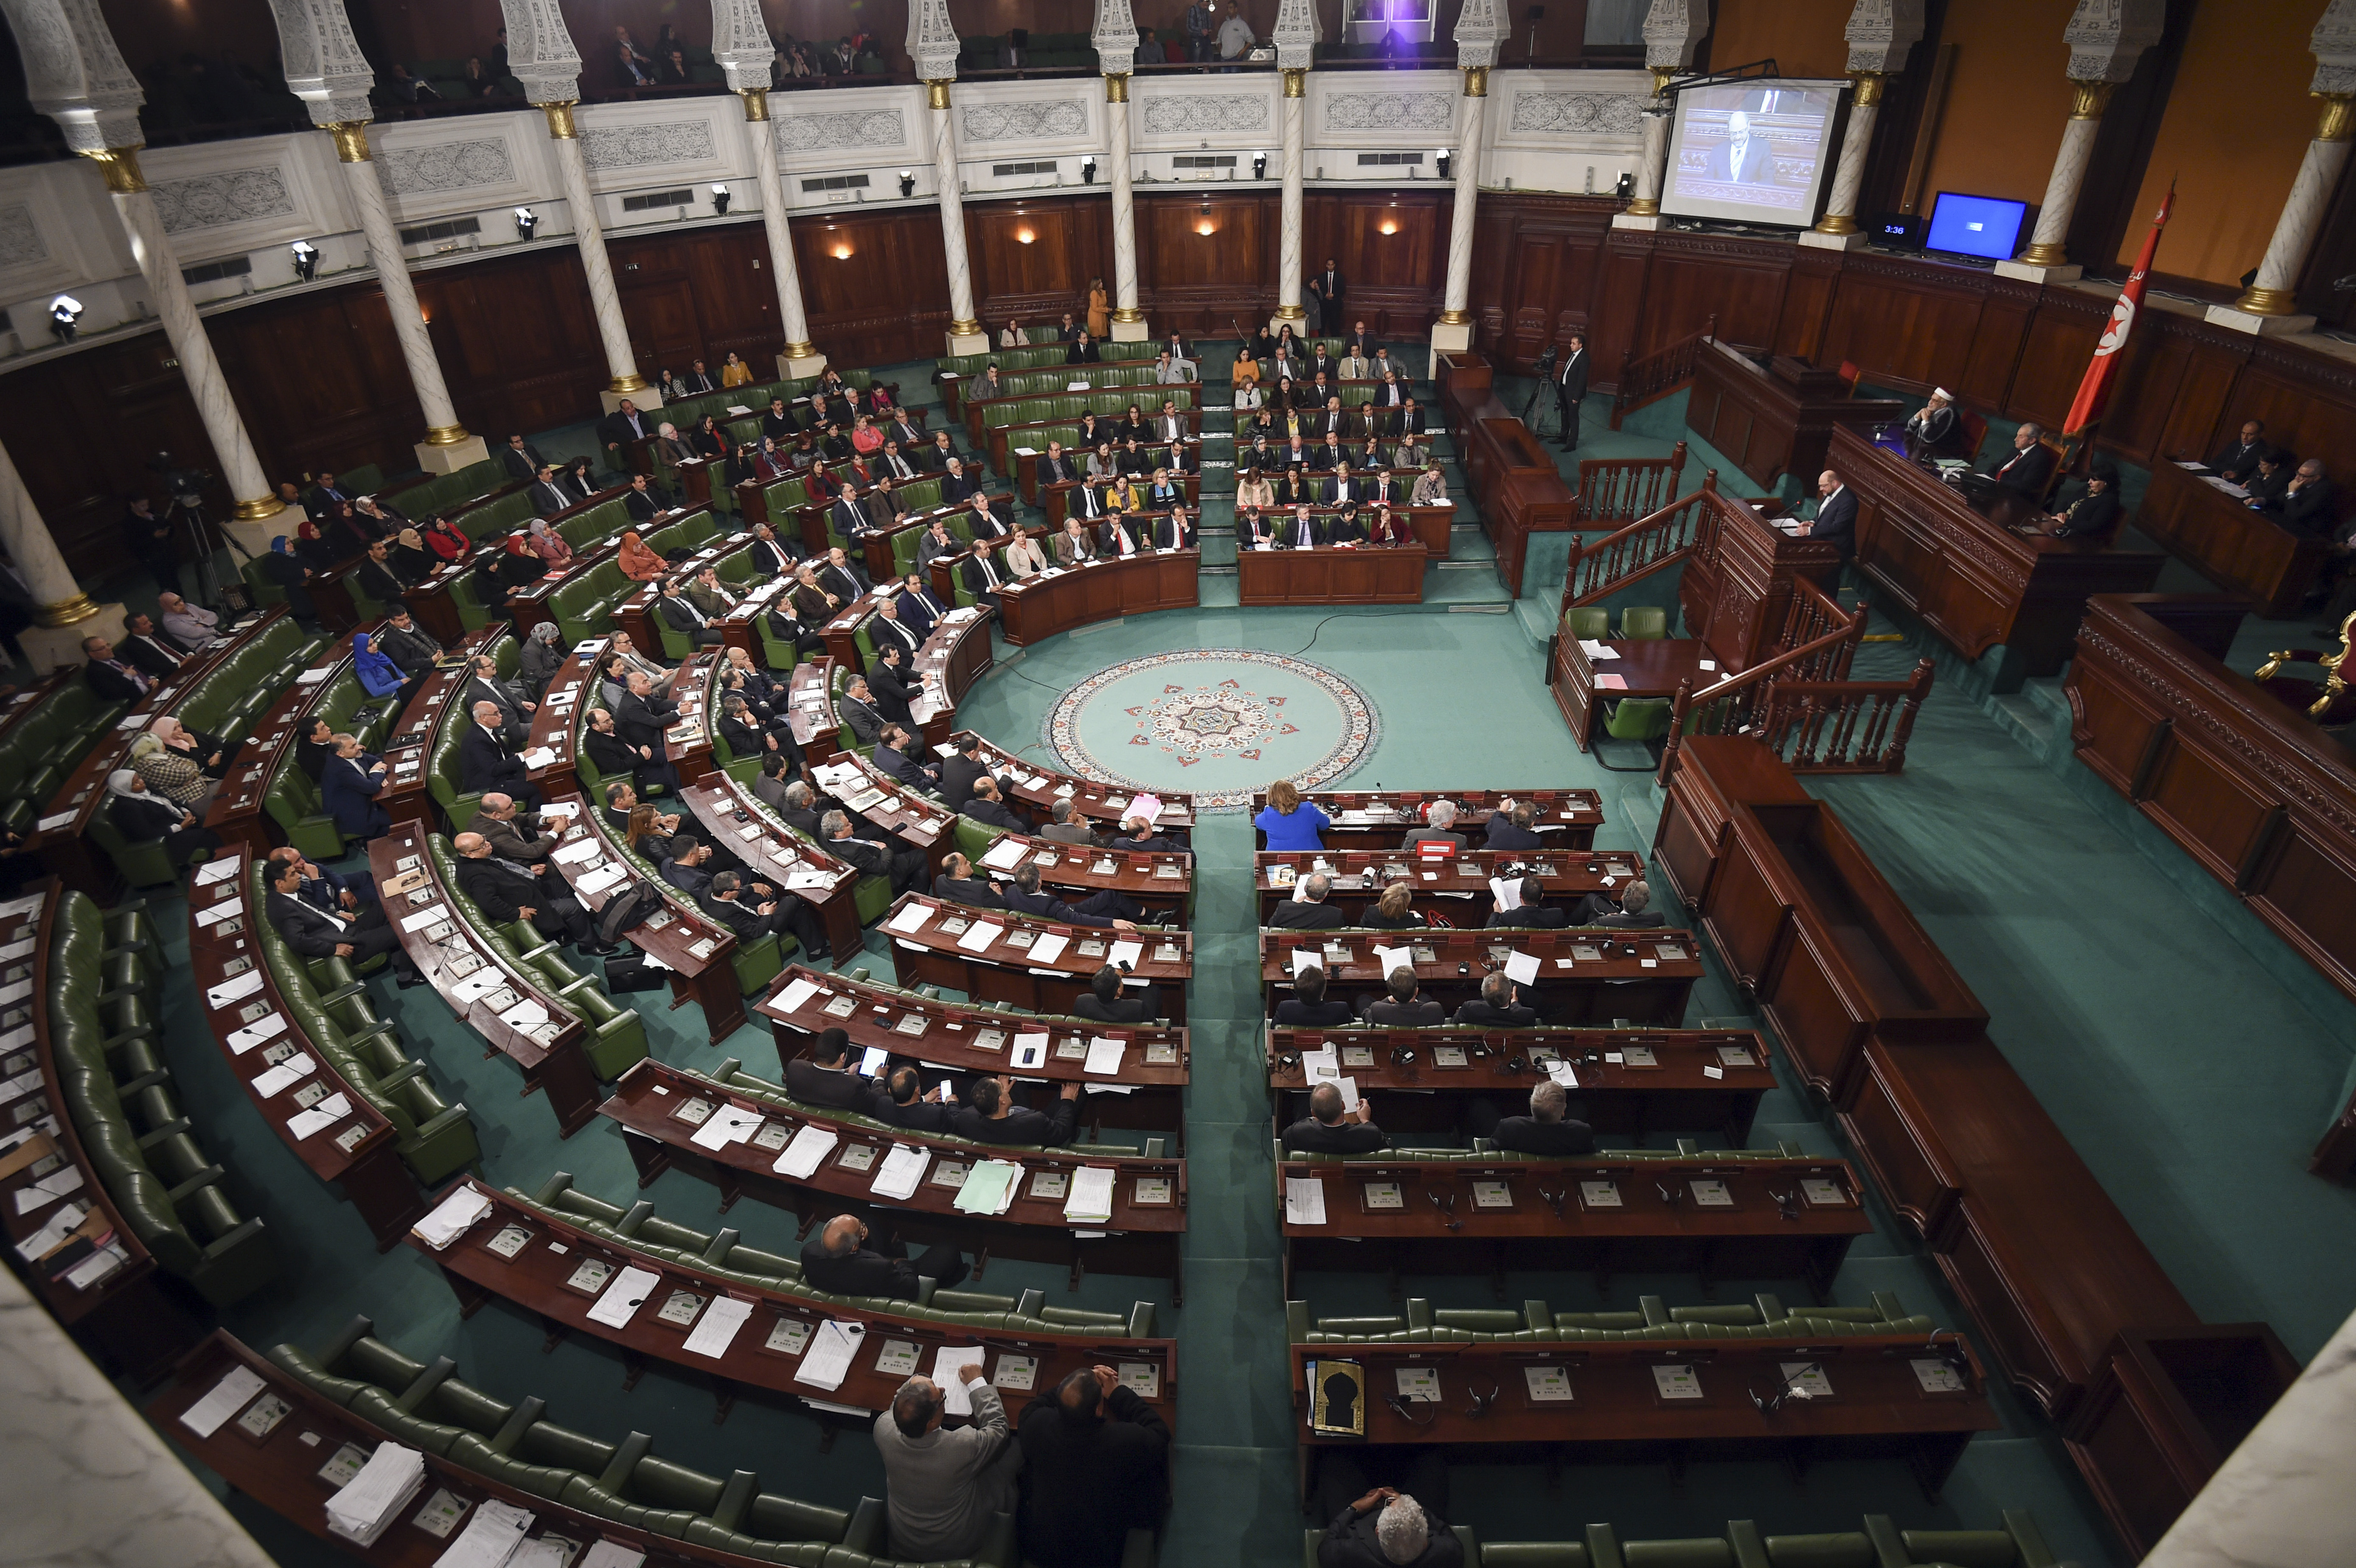  Tunisian Assembly of the Representatives of the People (photo credit: Martin Schulz/flickr)